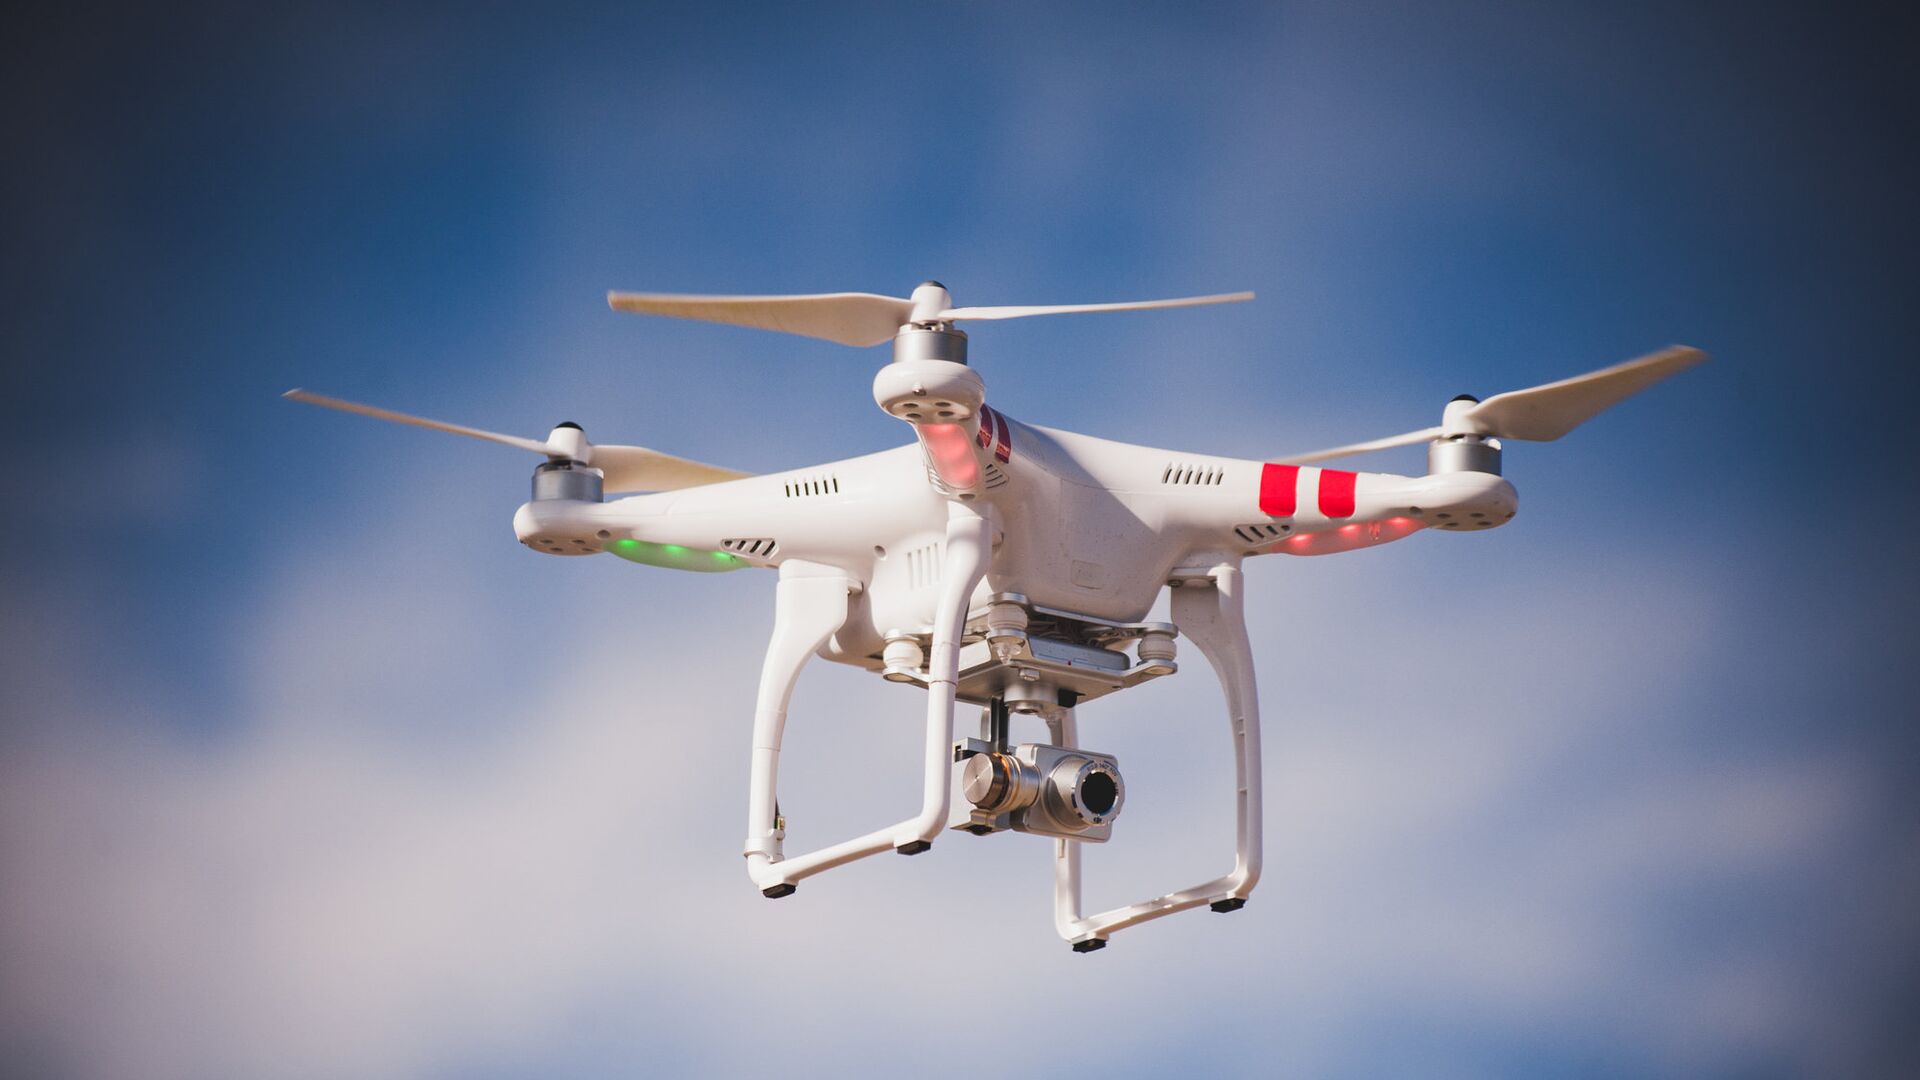 Restricted use of drones in the Omsk region